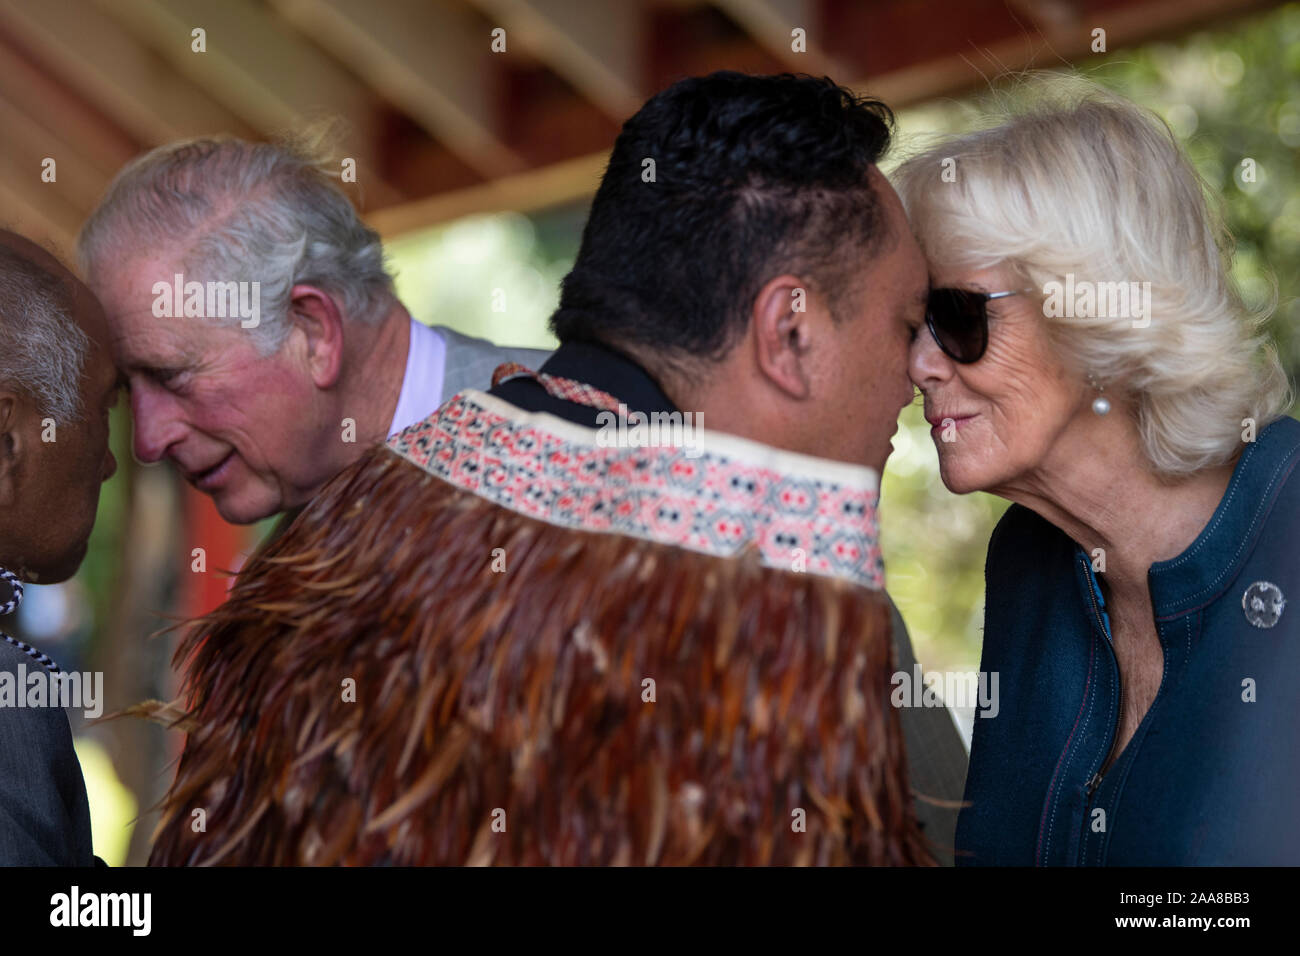 The Prince of Wales and the Duchess of Cornwall receive a traditional hongi gesture during their visit to Waitangi Treaty Grounds, the Bay of Islands, on the fourth day of the royal visit to New Zealand. Stock Photo